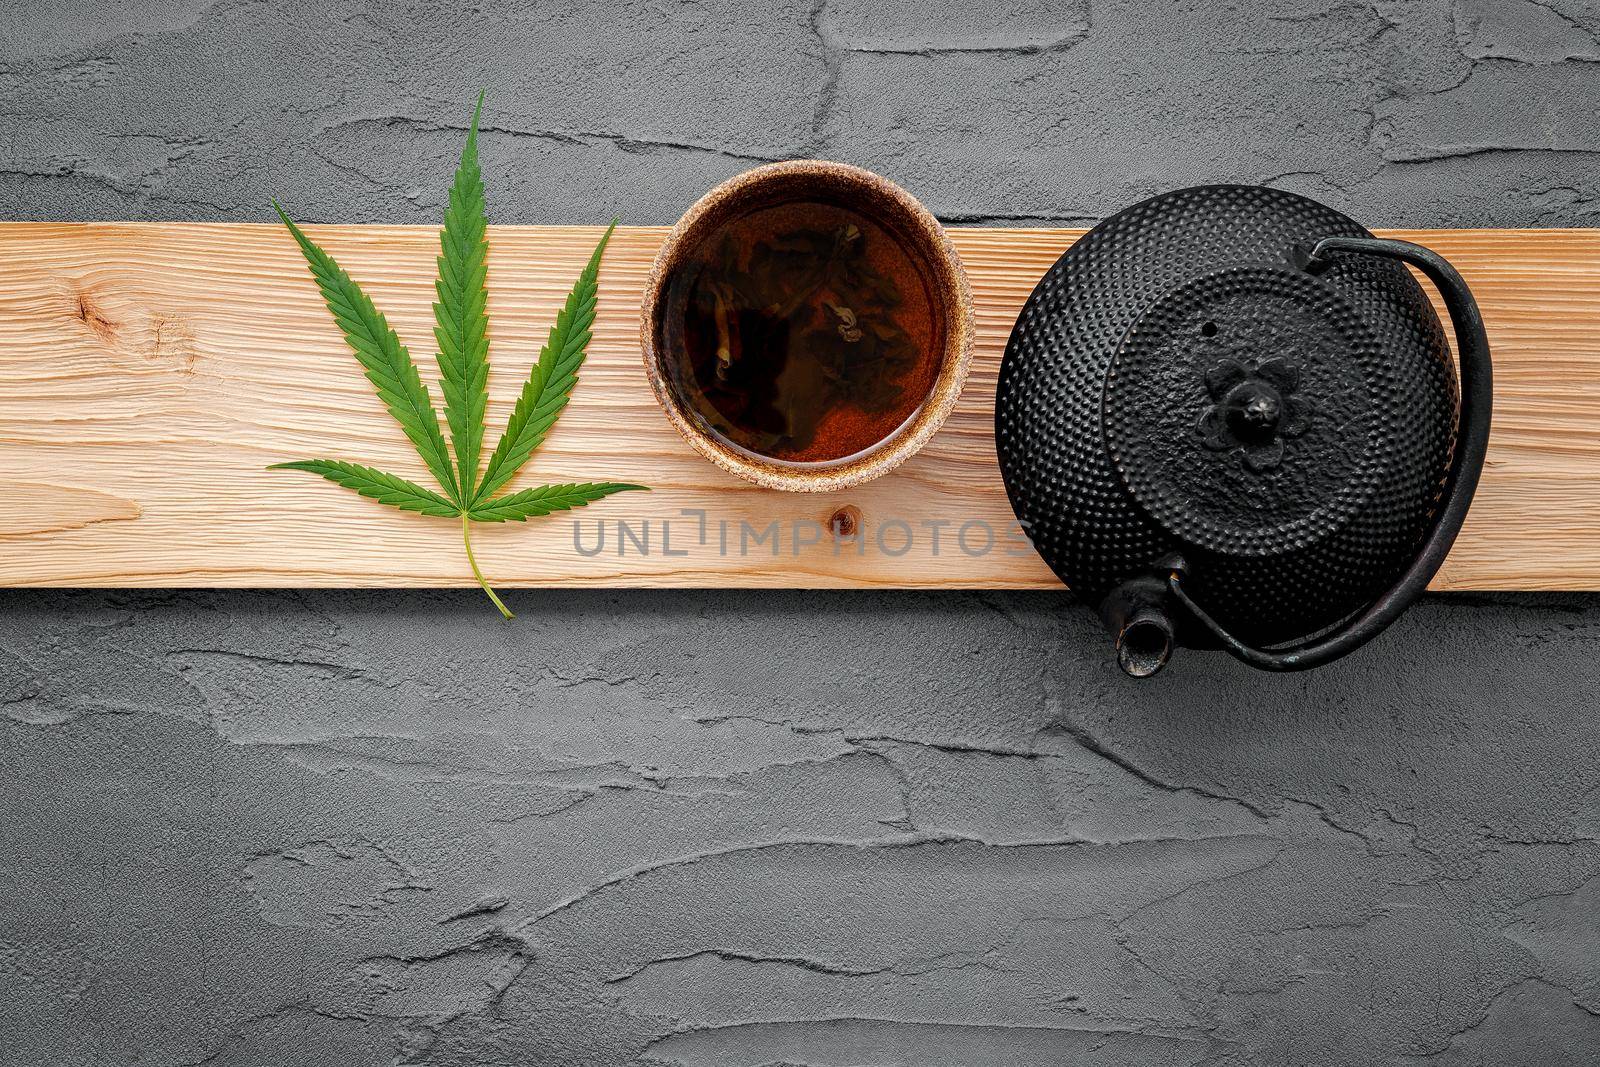 Vintage teapot with cannabis herbal tea and fresh marijuana leaves set up on concrete background.